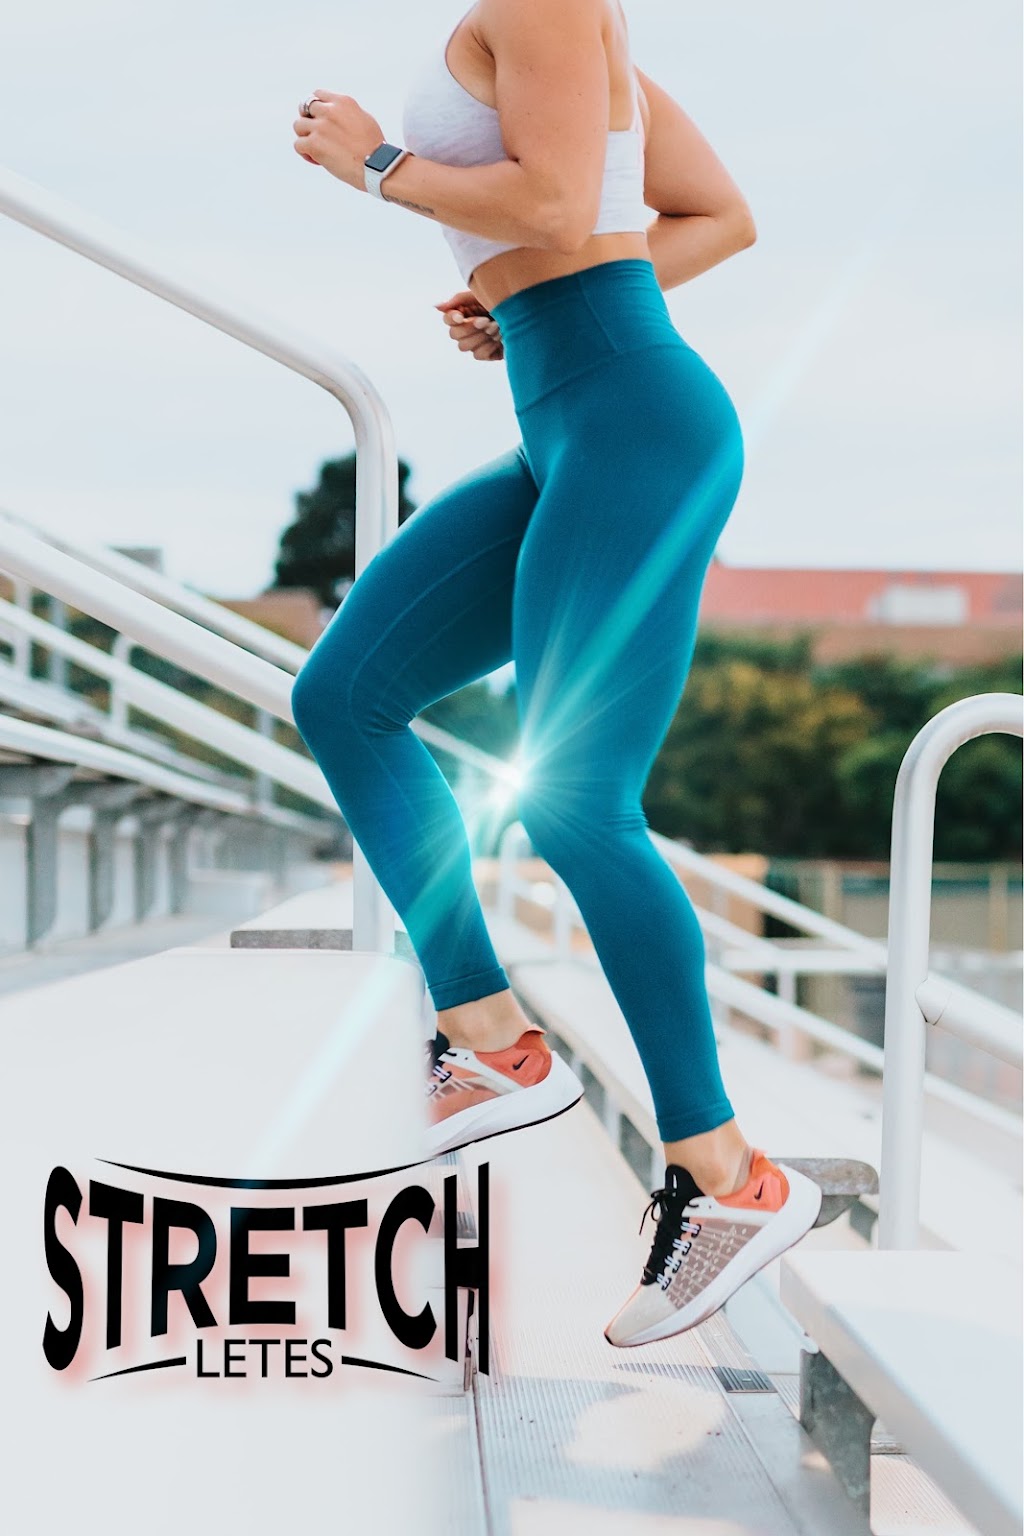 Stretch-Letes | 30420 FM2978 #200, The Woodlands, TX 77354, USA | Phone: (337) 282-8668